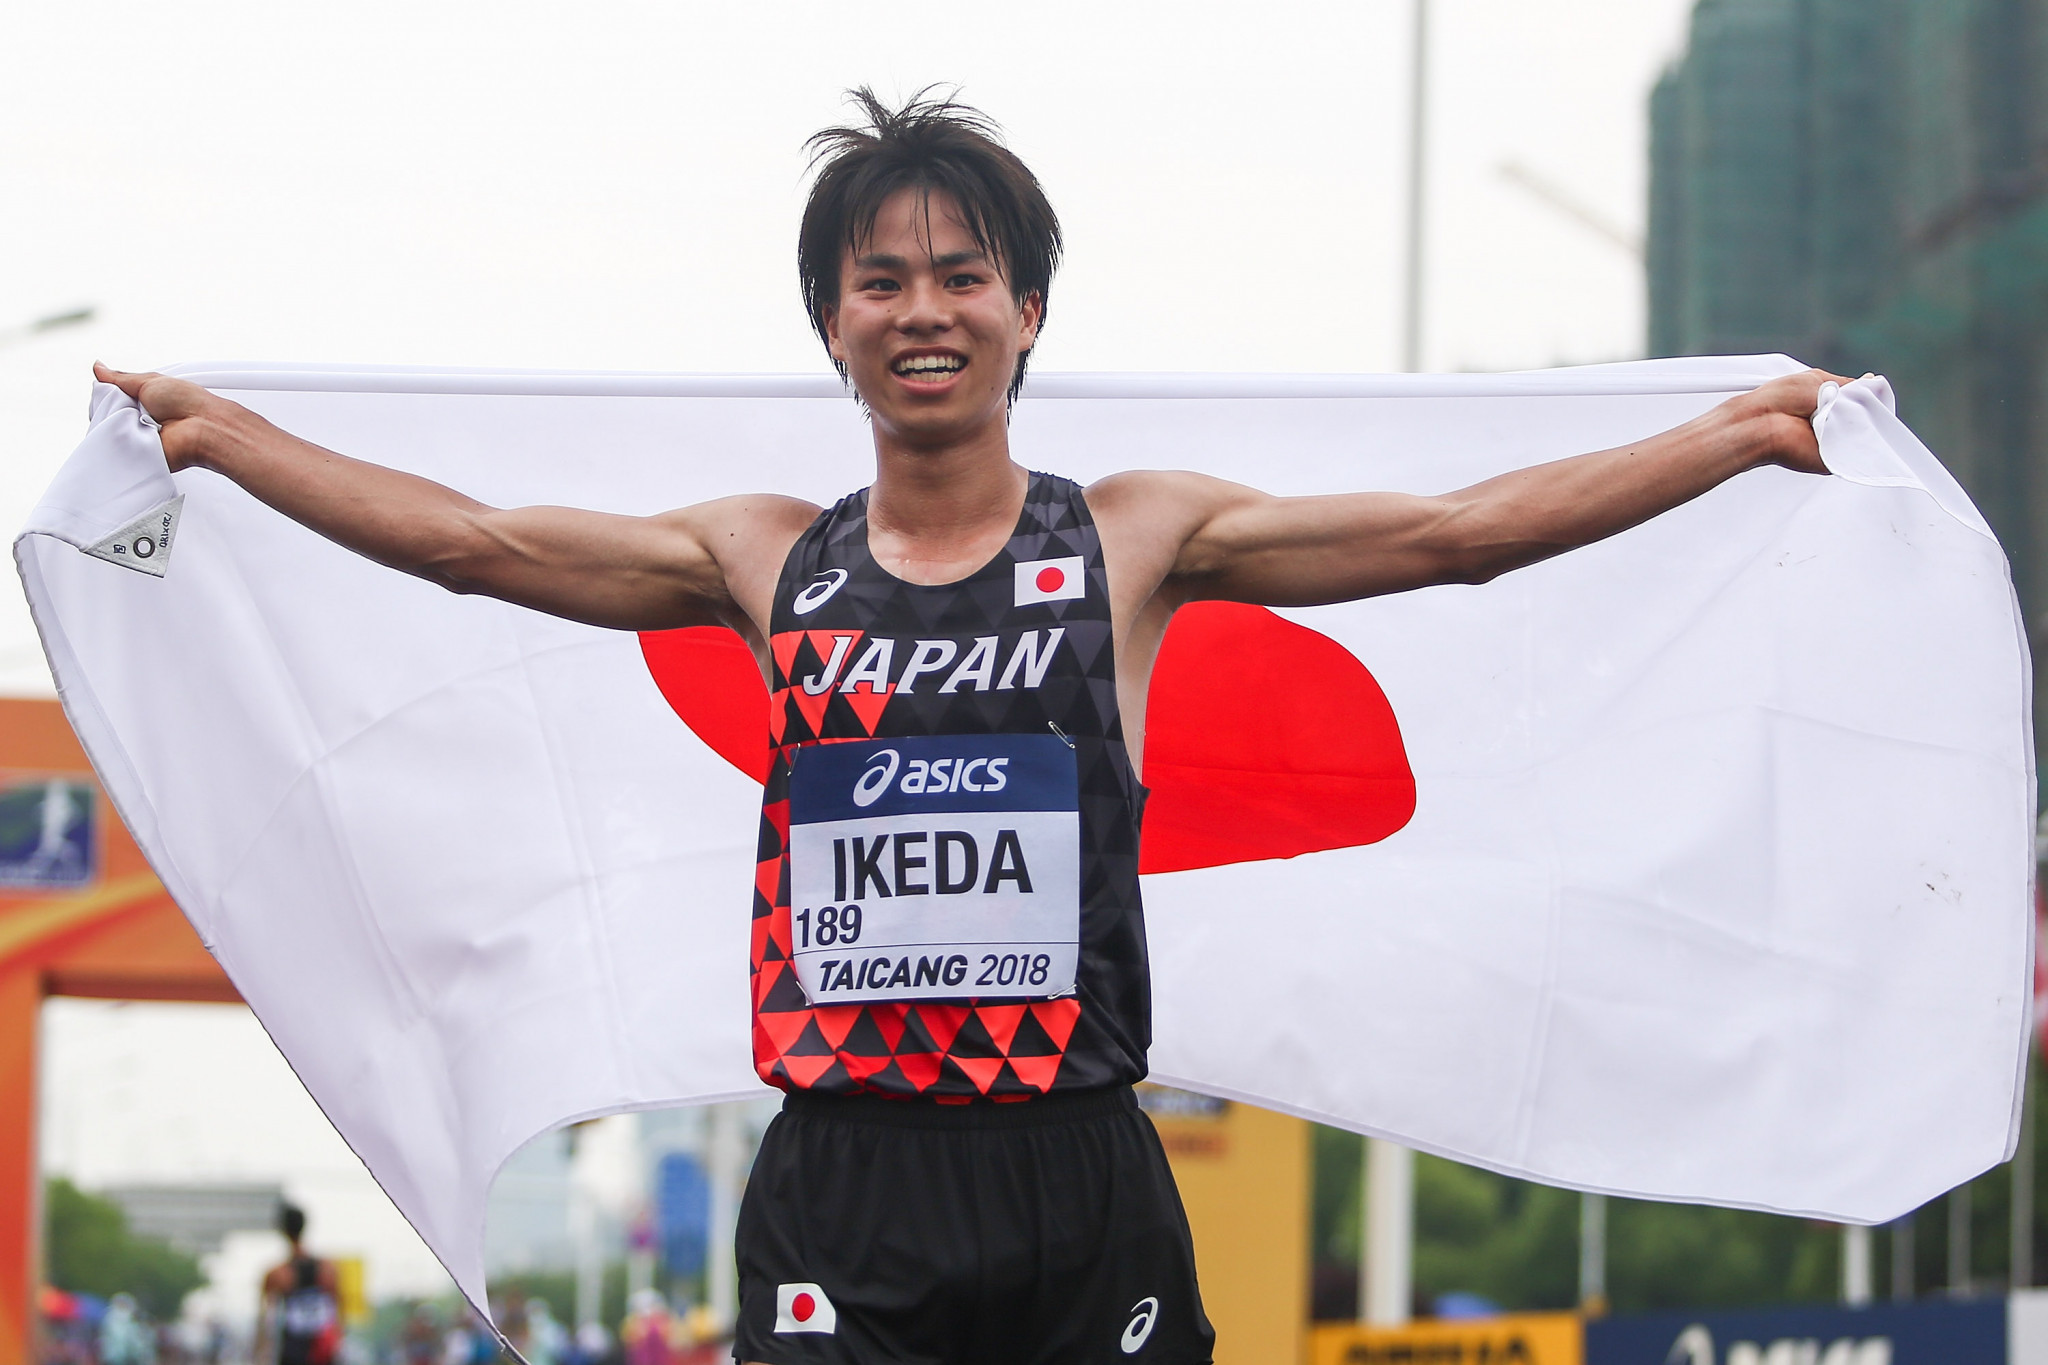 Ikeda claims men's 20km title at IAAF World Race Walking Team Championships